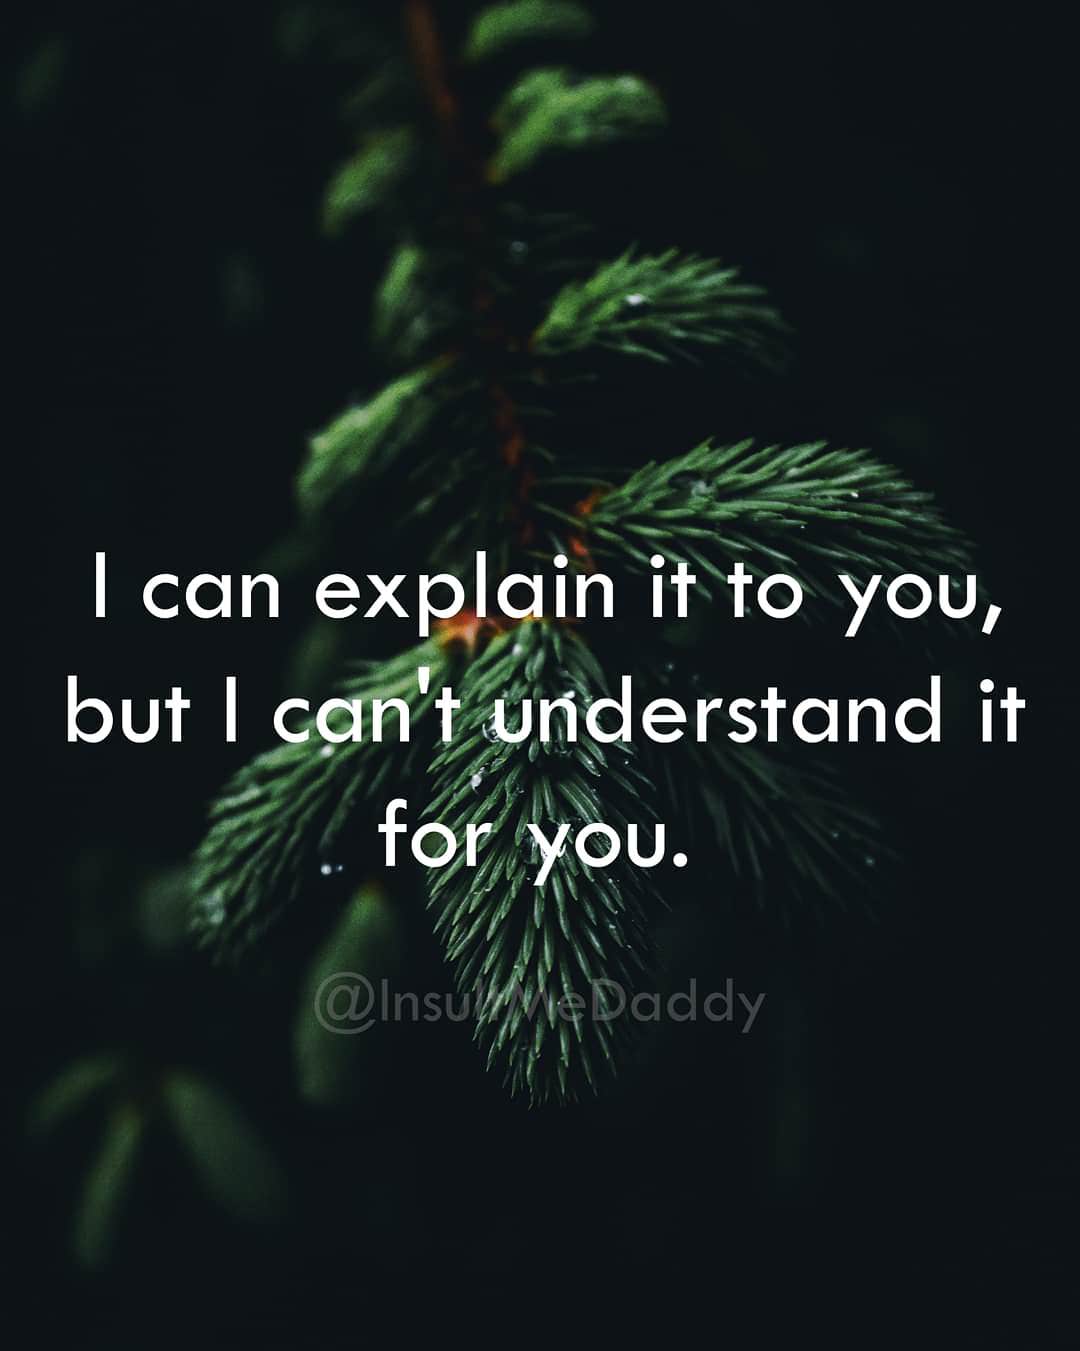 fir - I can explain it to you, but I can't understand it 7 for you. Daddy